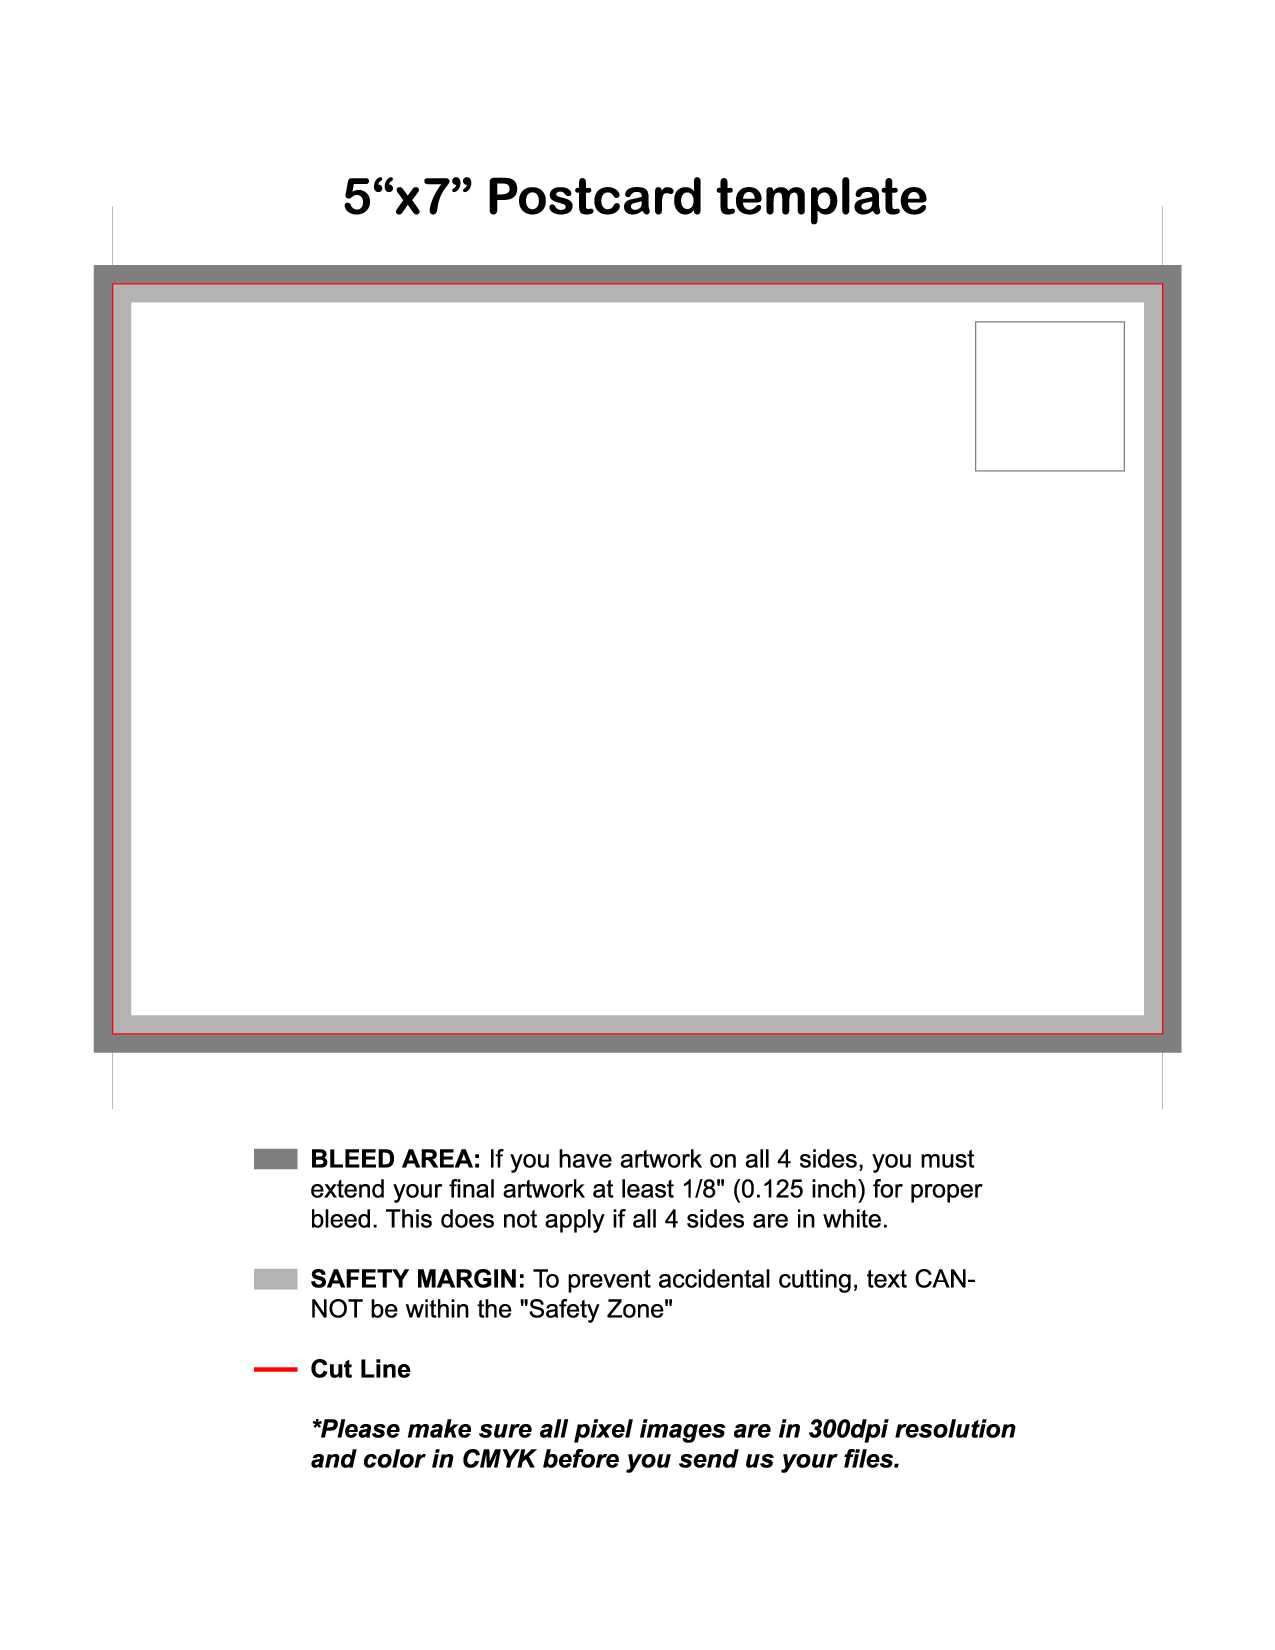 Equity Fax Template Word 2010 – Takub With Regard To Microsoft Word 4X6 Postcard Template